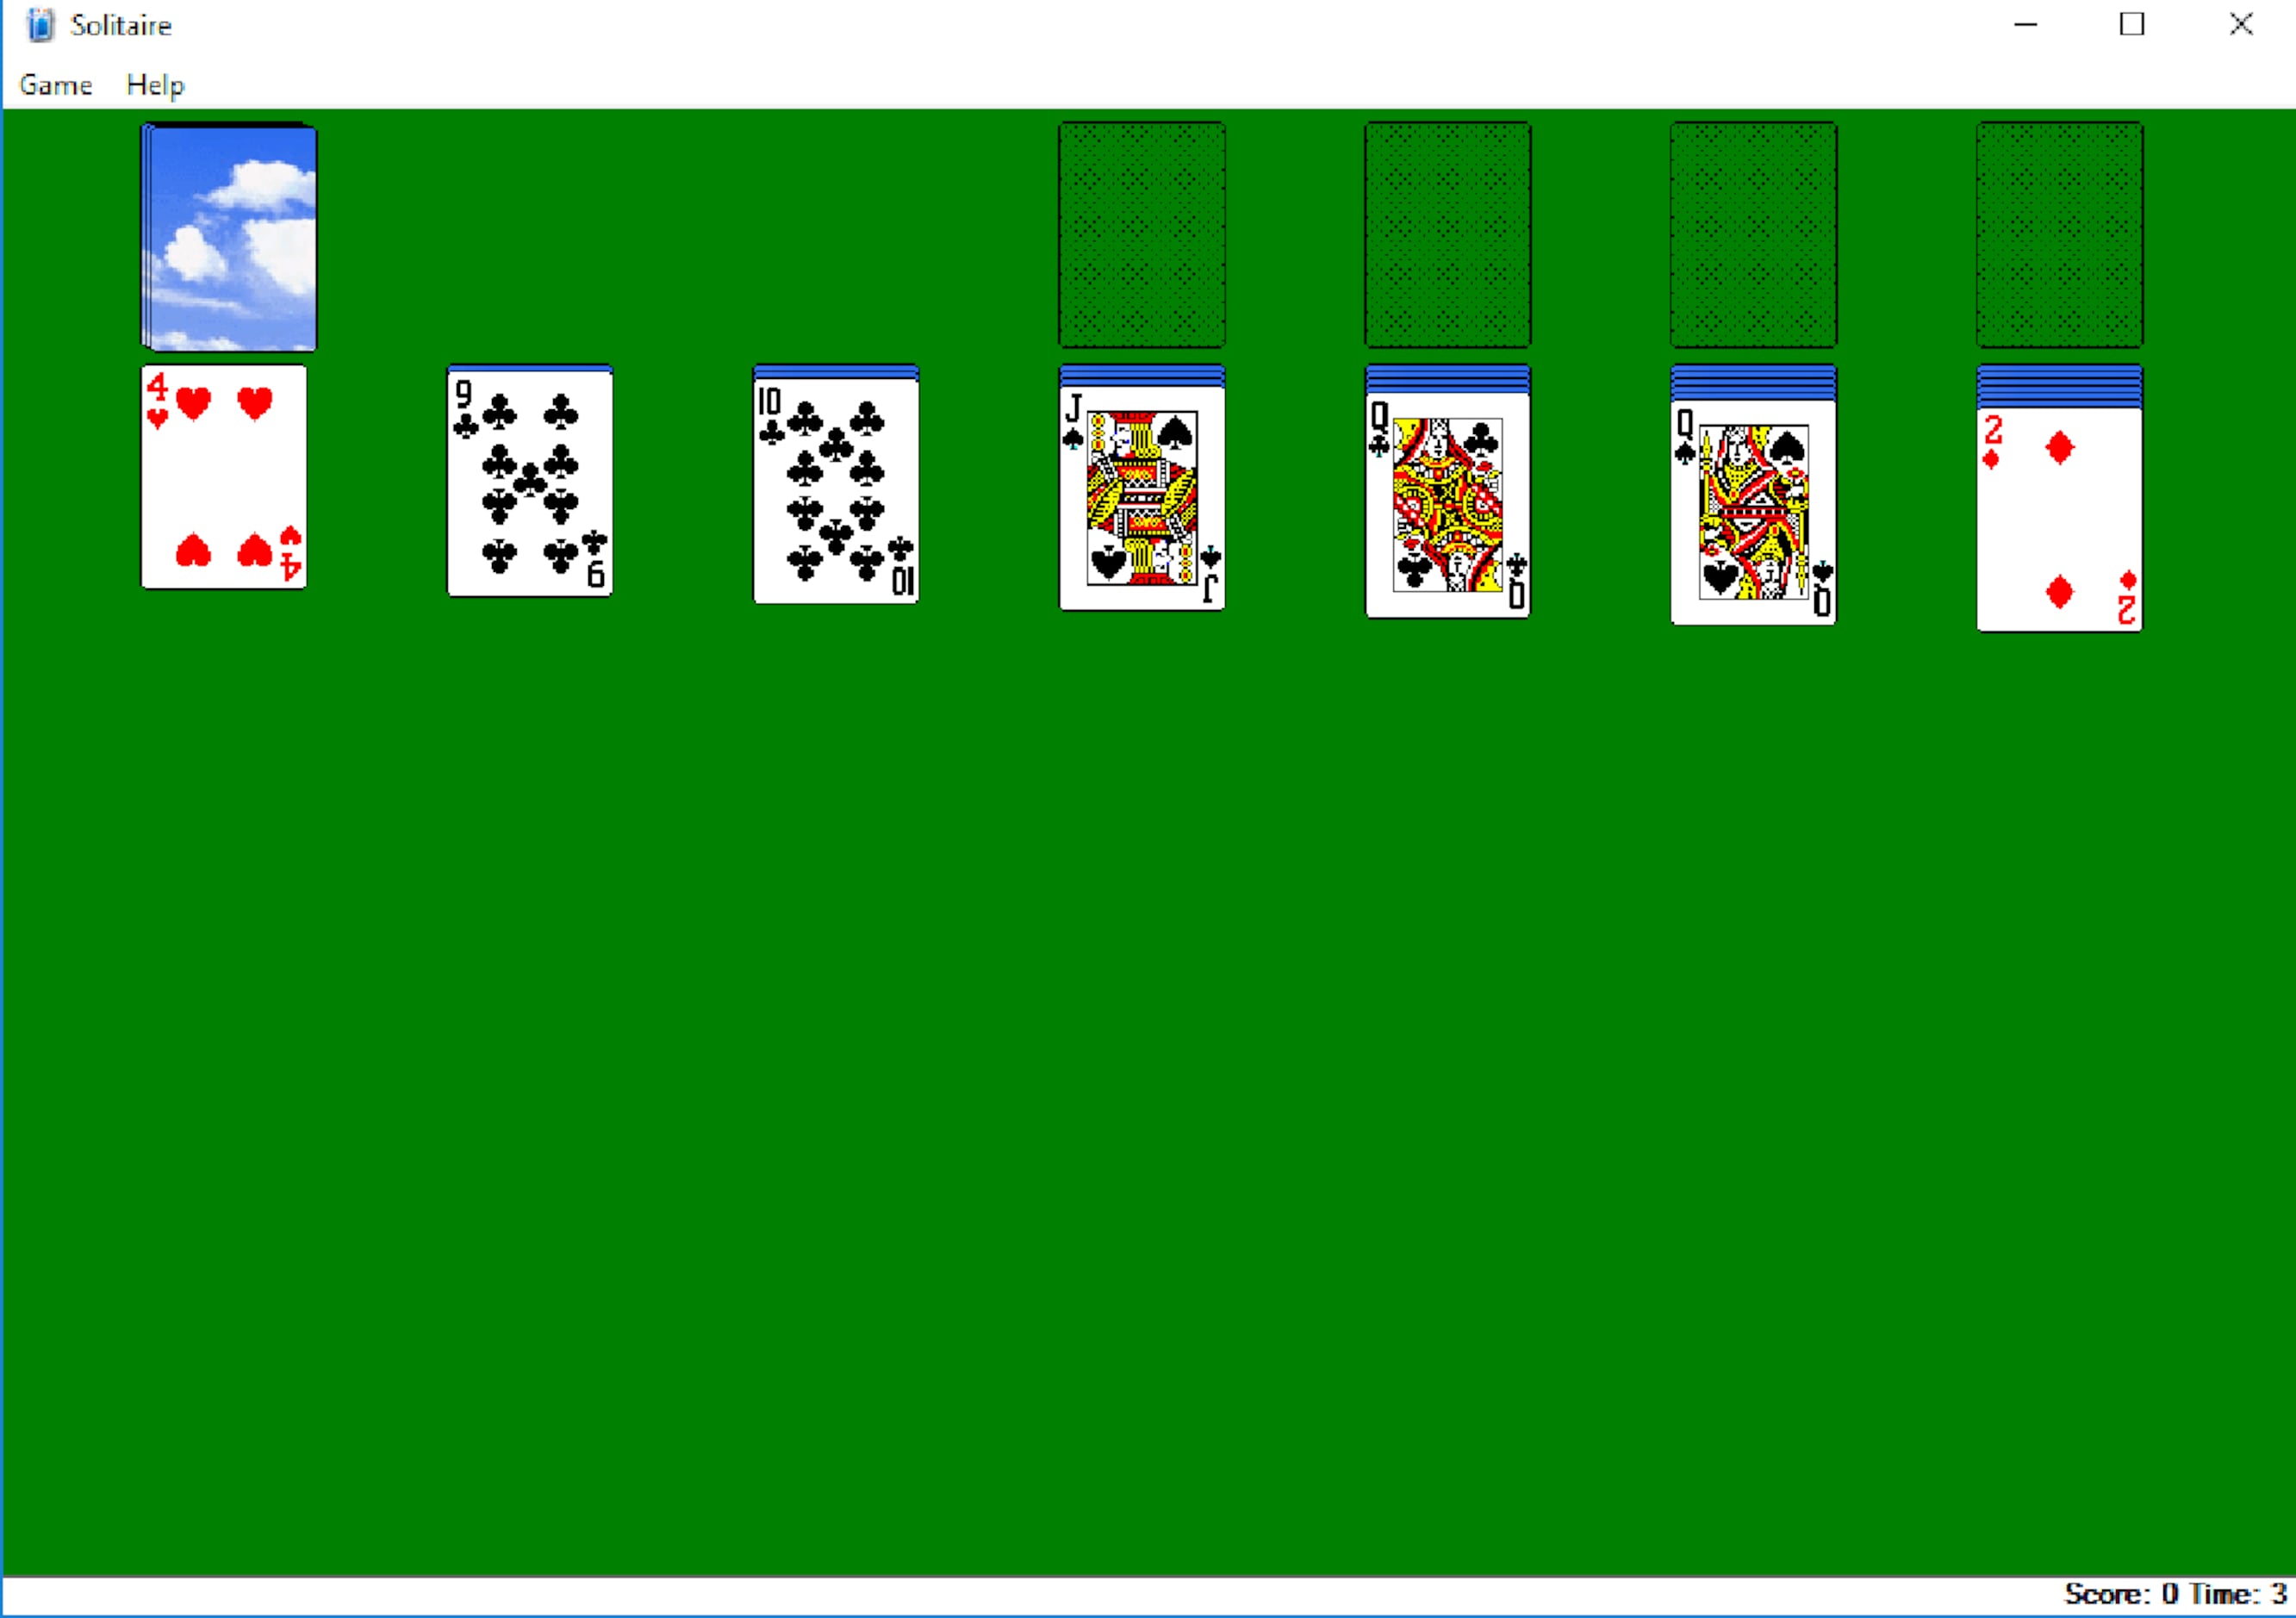 How to uninstall Microsoft Solitaire Collection in Windows 10